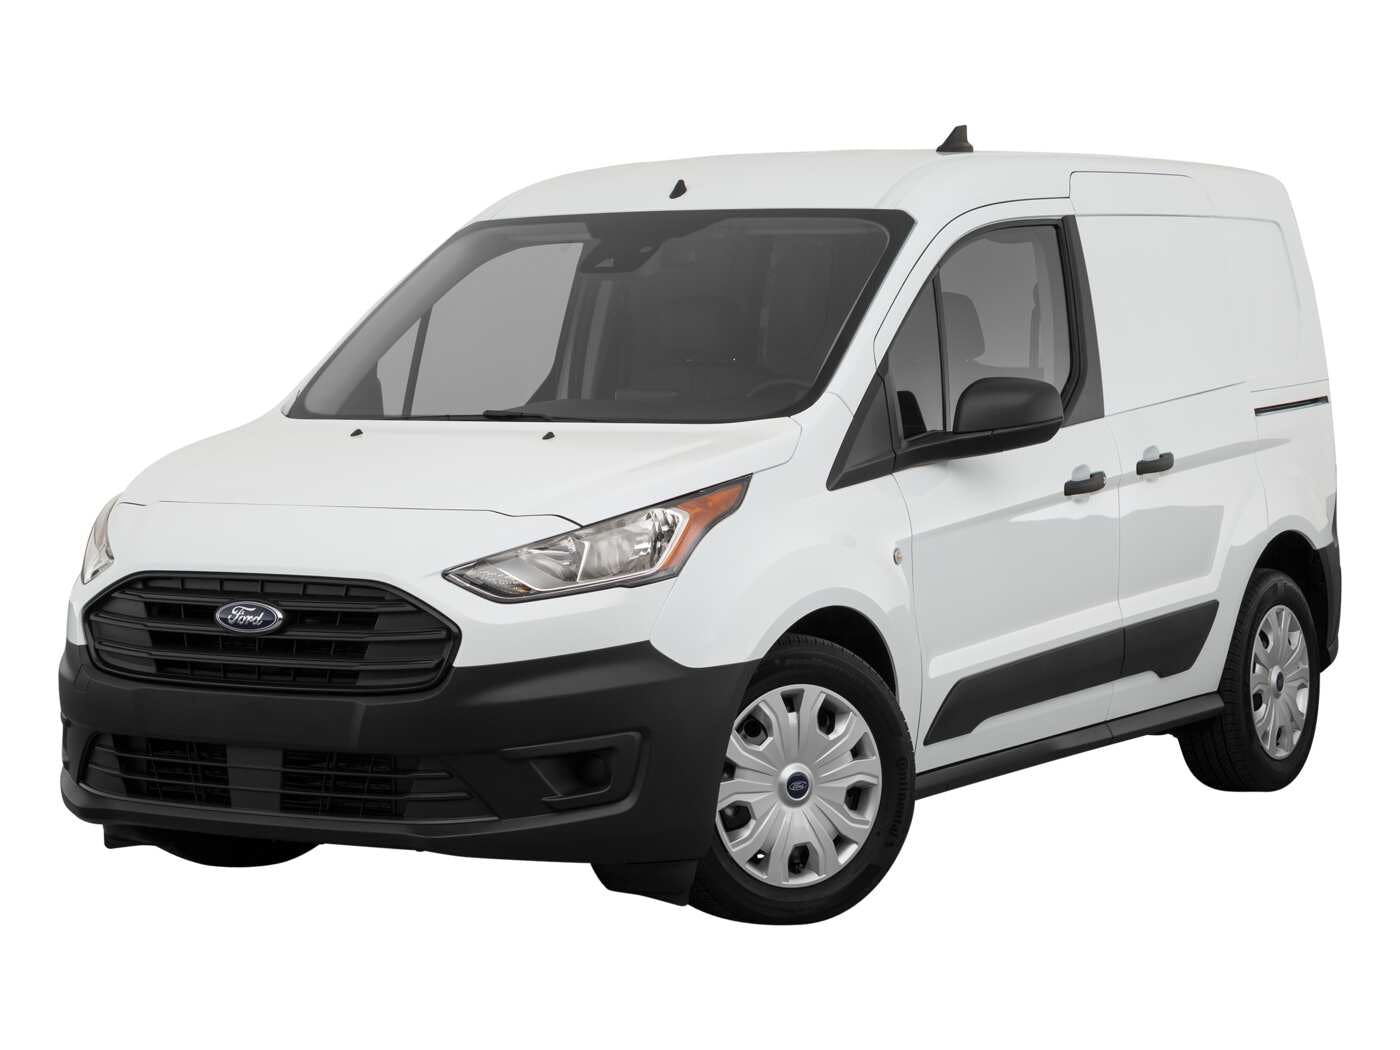 small ford cargo van